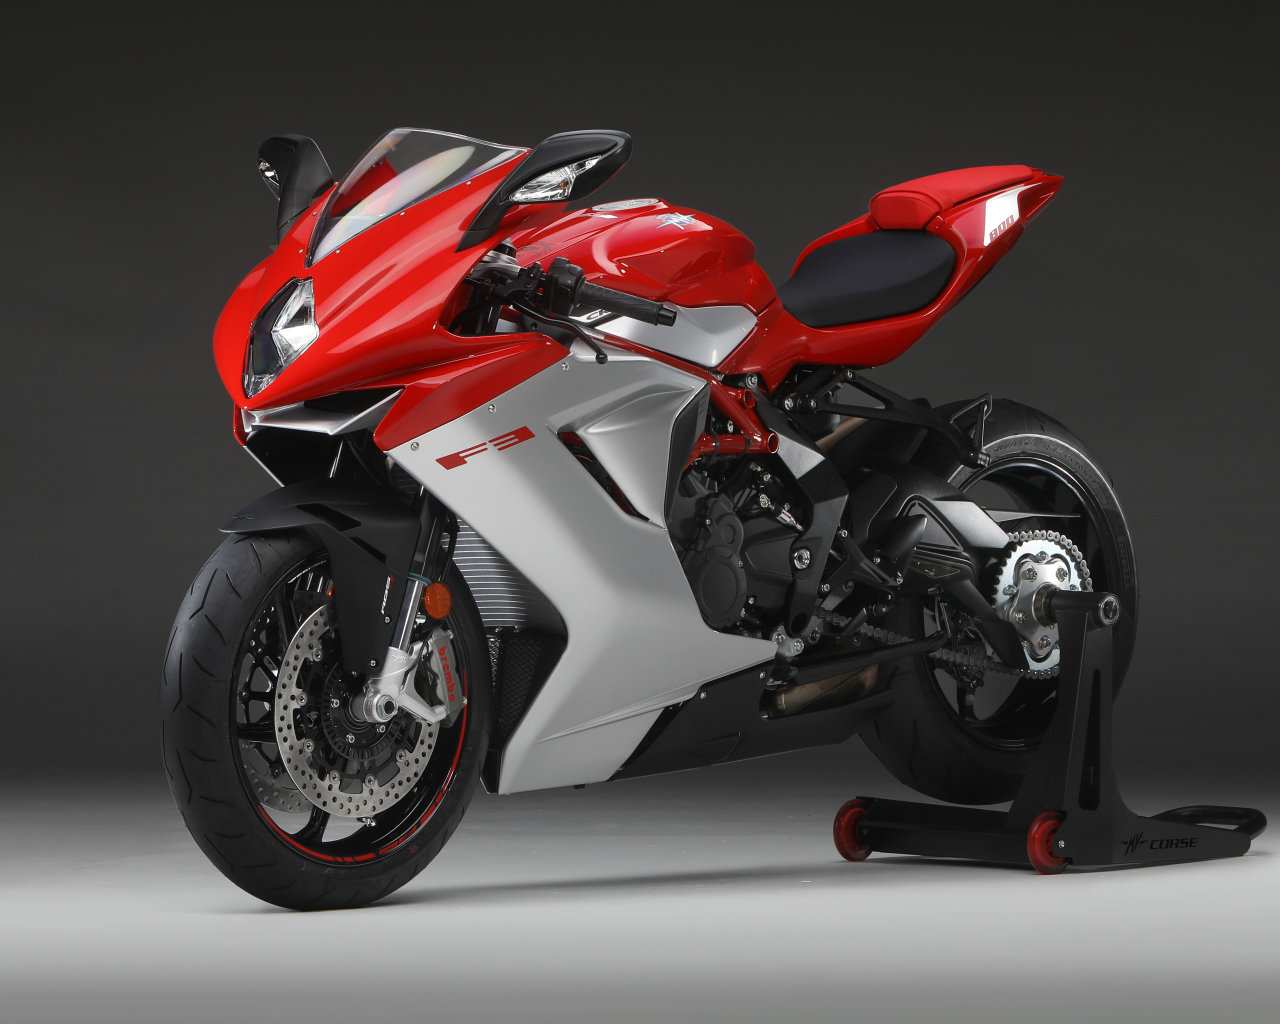 Red Agusta F3 800 2020 motorcycle on a gray background